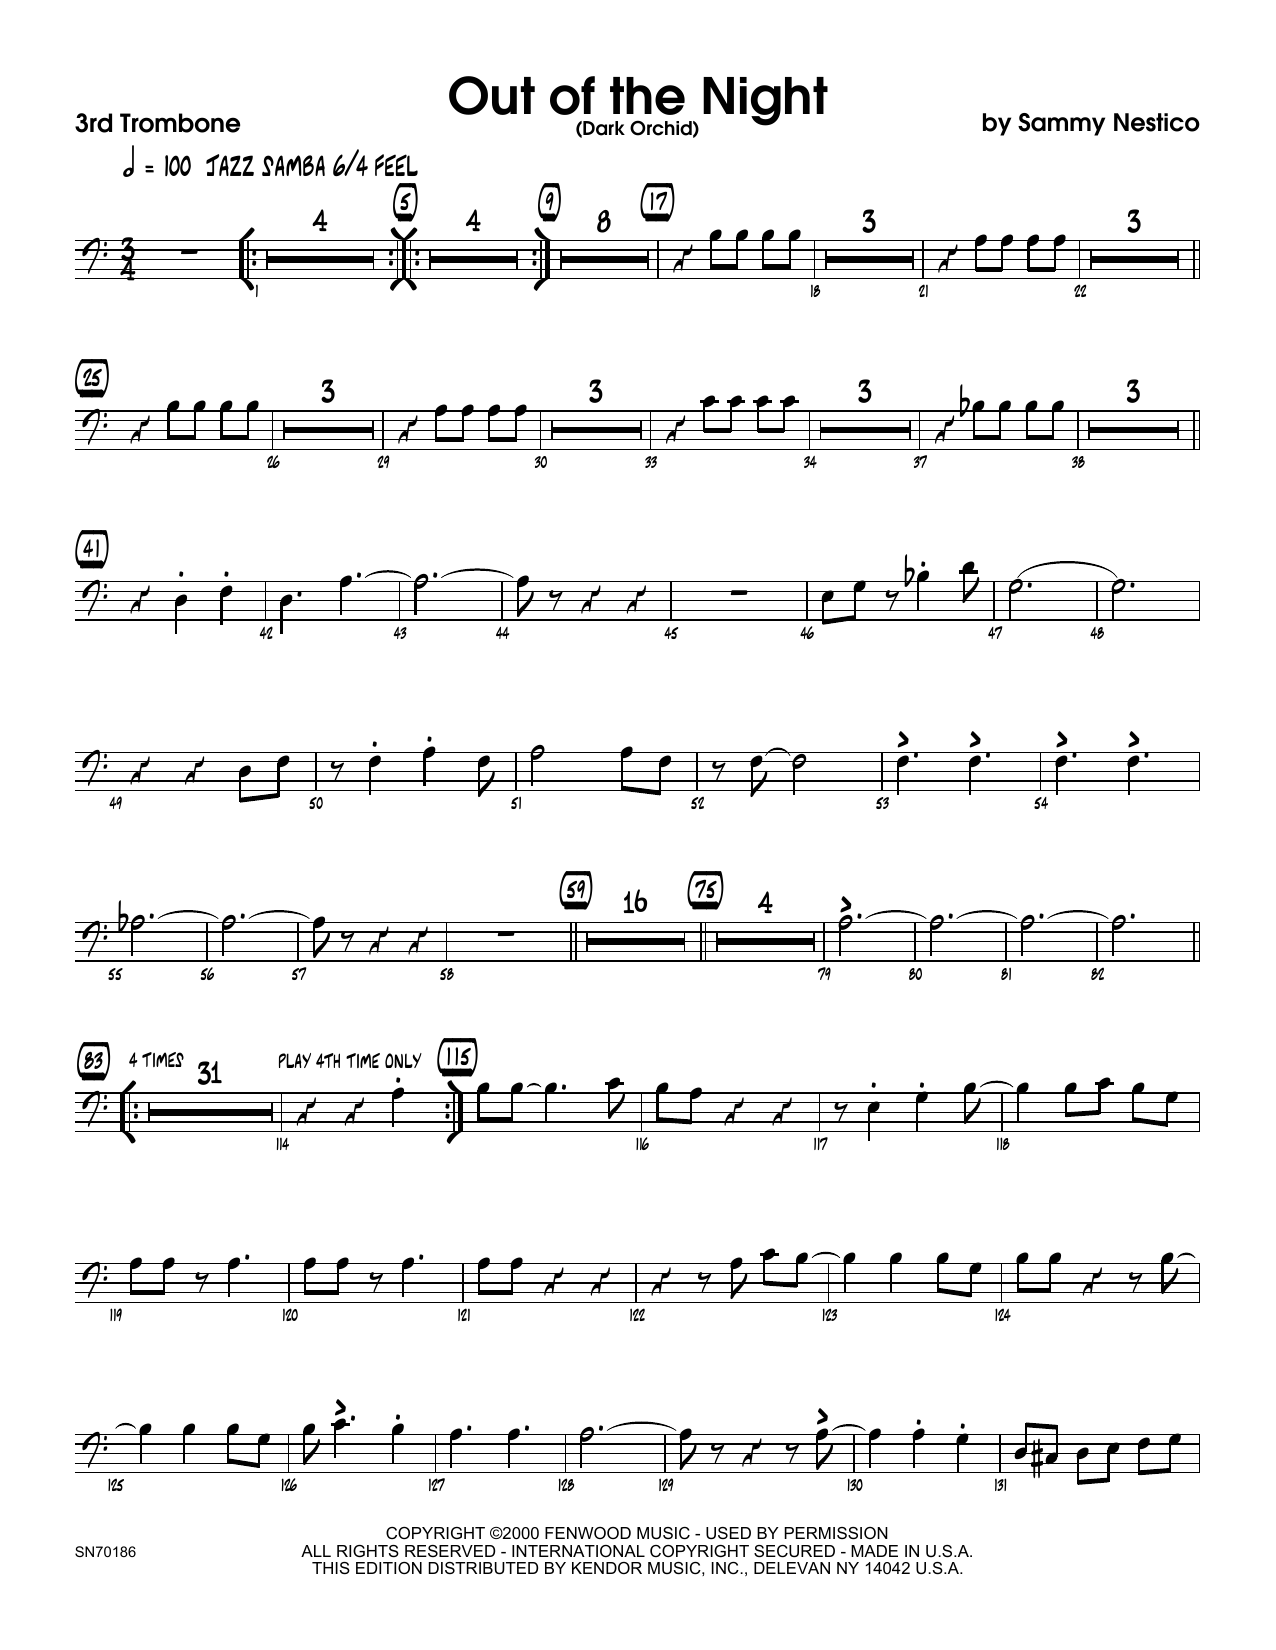 Download Sammy Nestico Out of the Night - 3rd Trombone Sheet Music